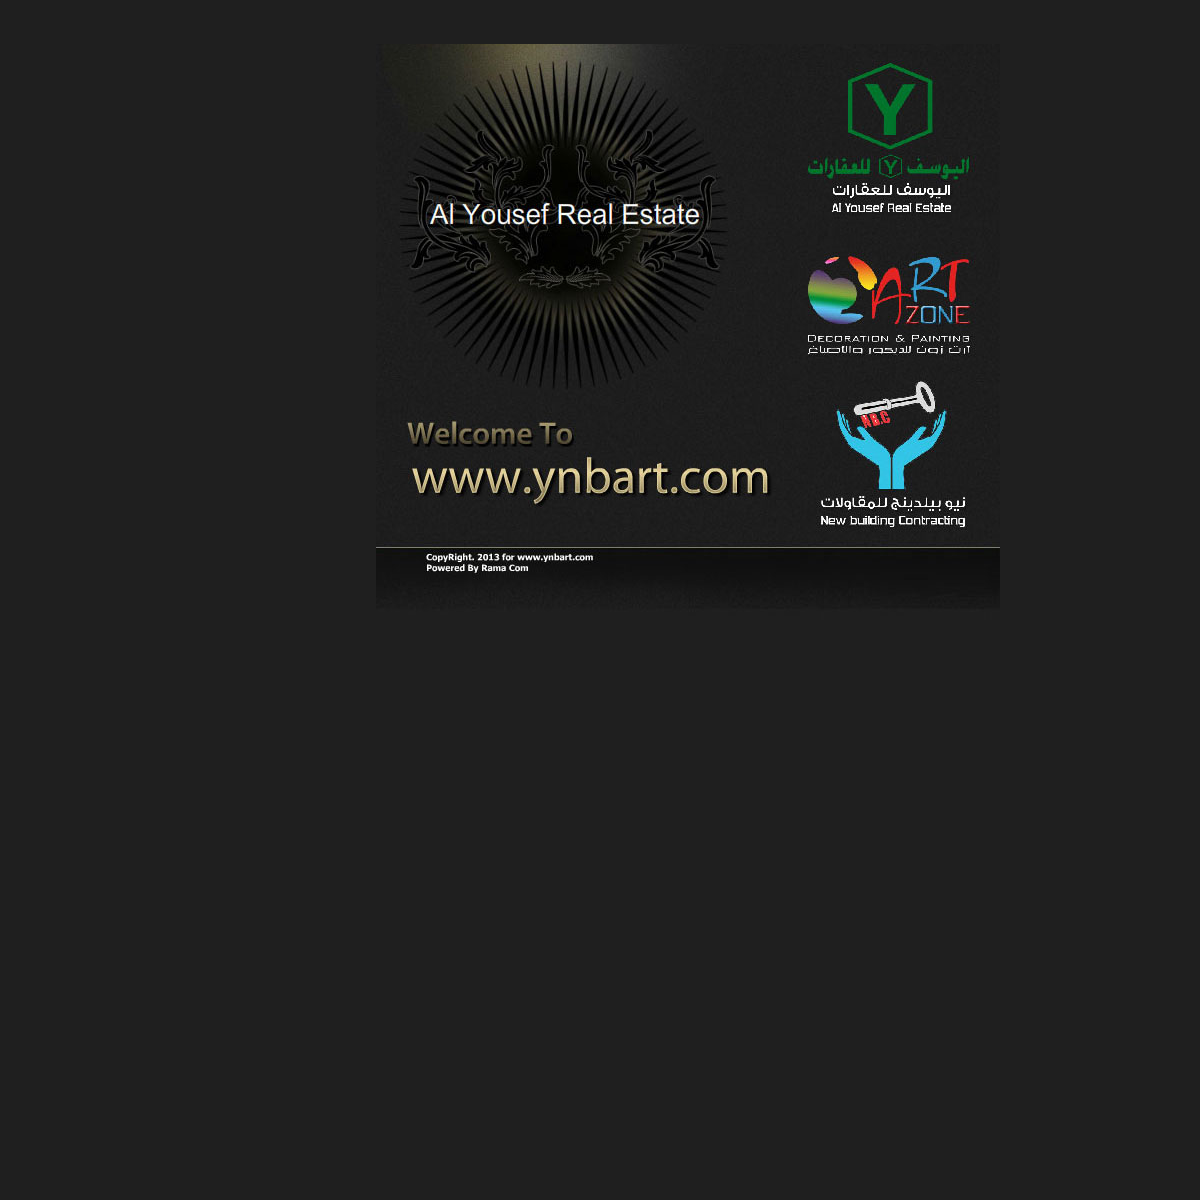 A complete backup of ynbart.com